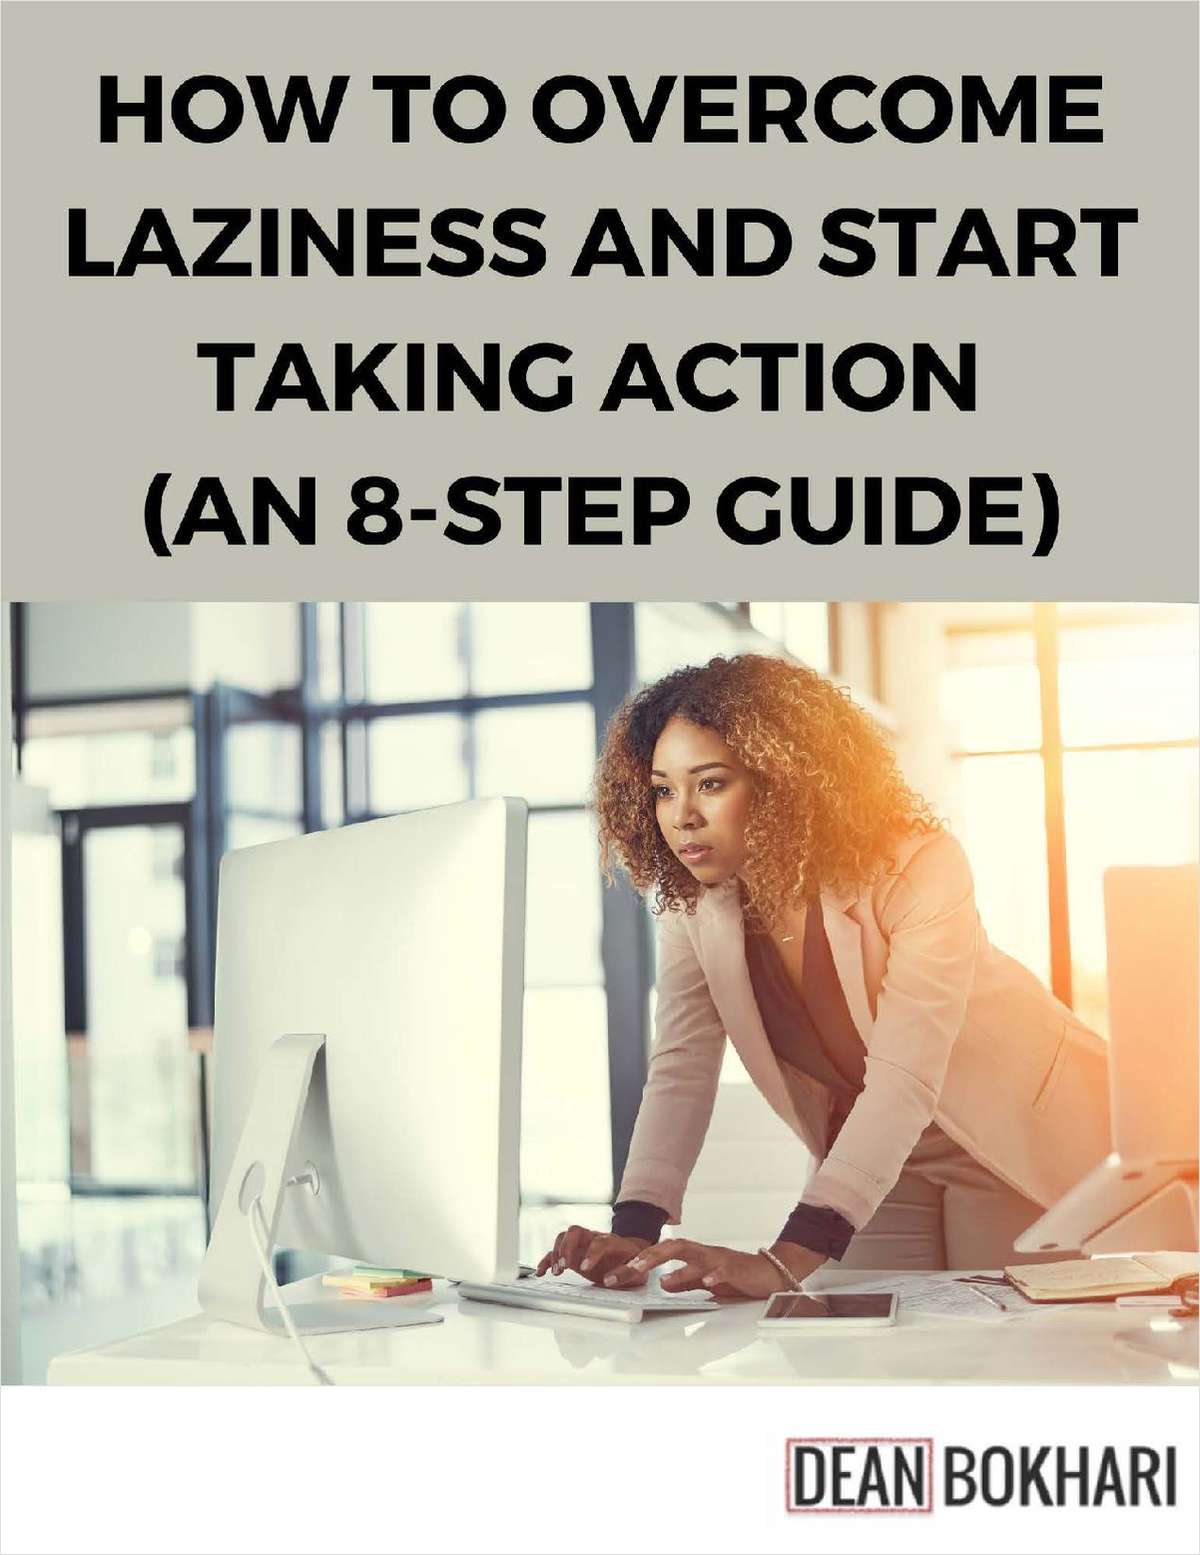 How to Overcome Laziness and Start Taking Action -- an 8-Step Guide